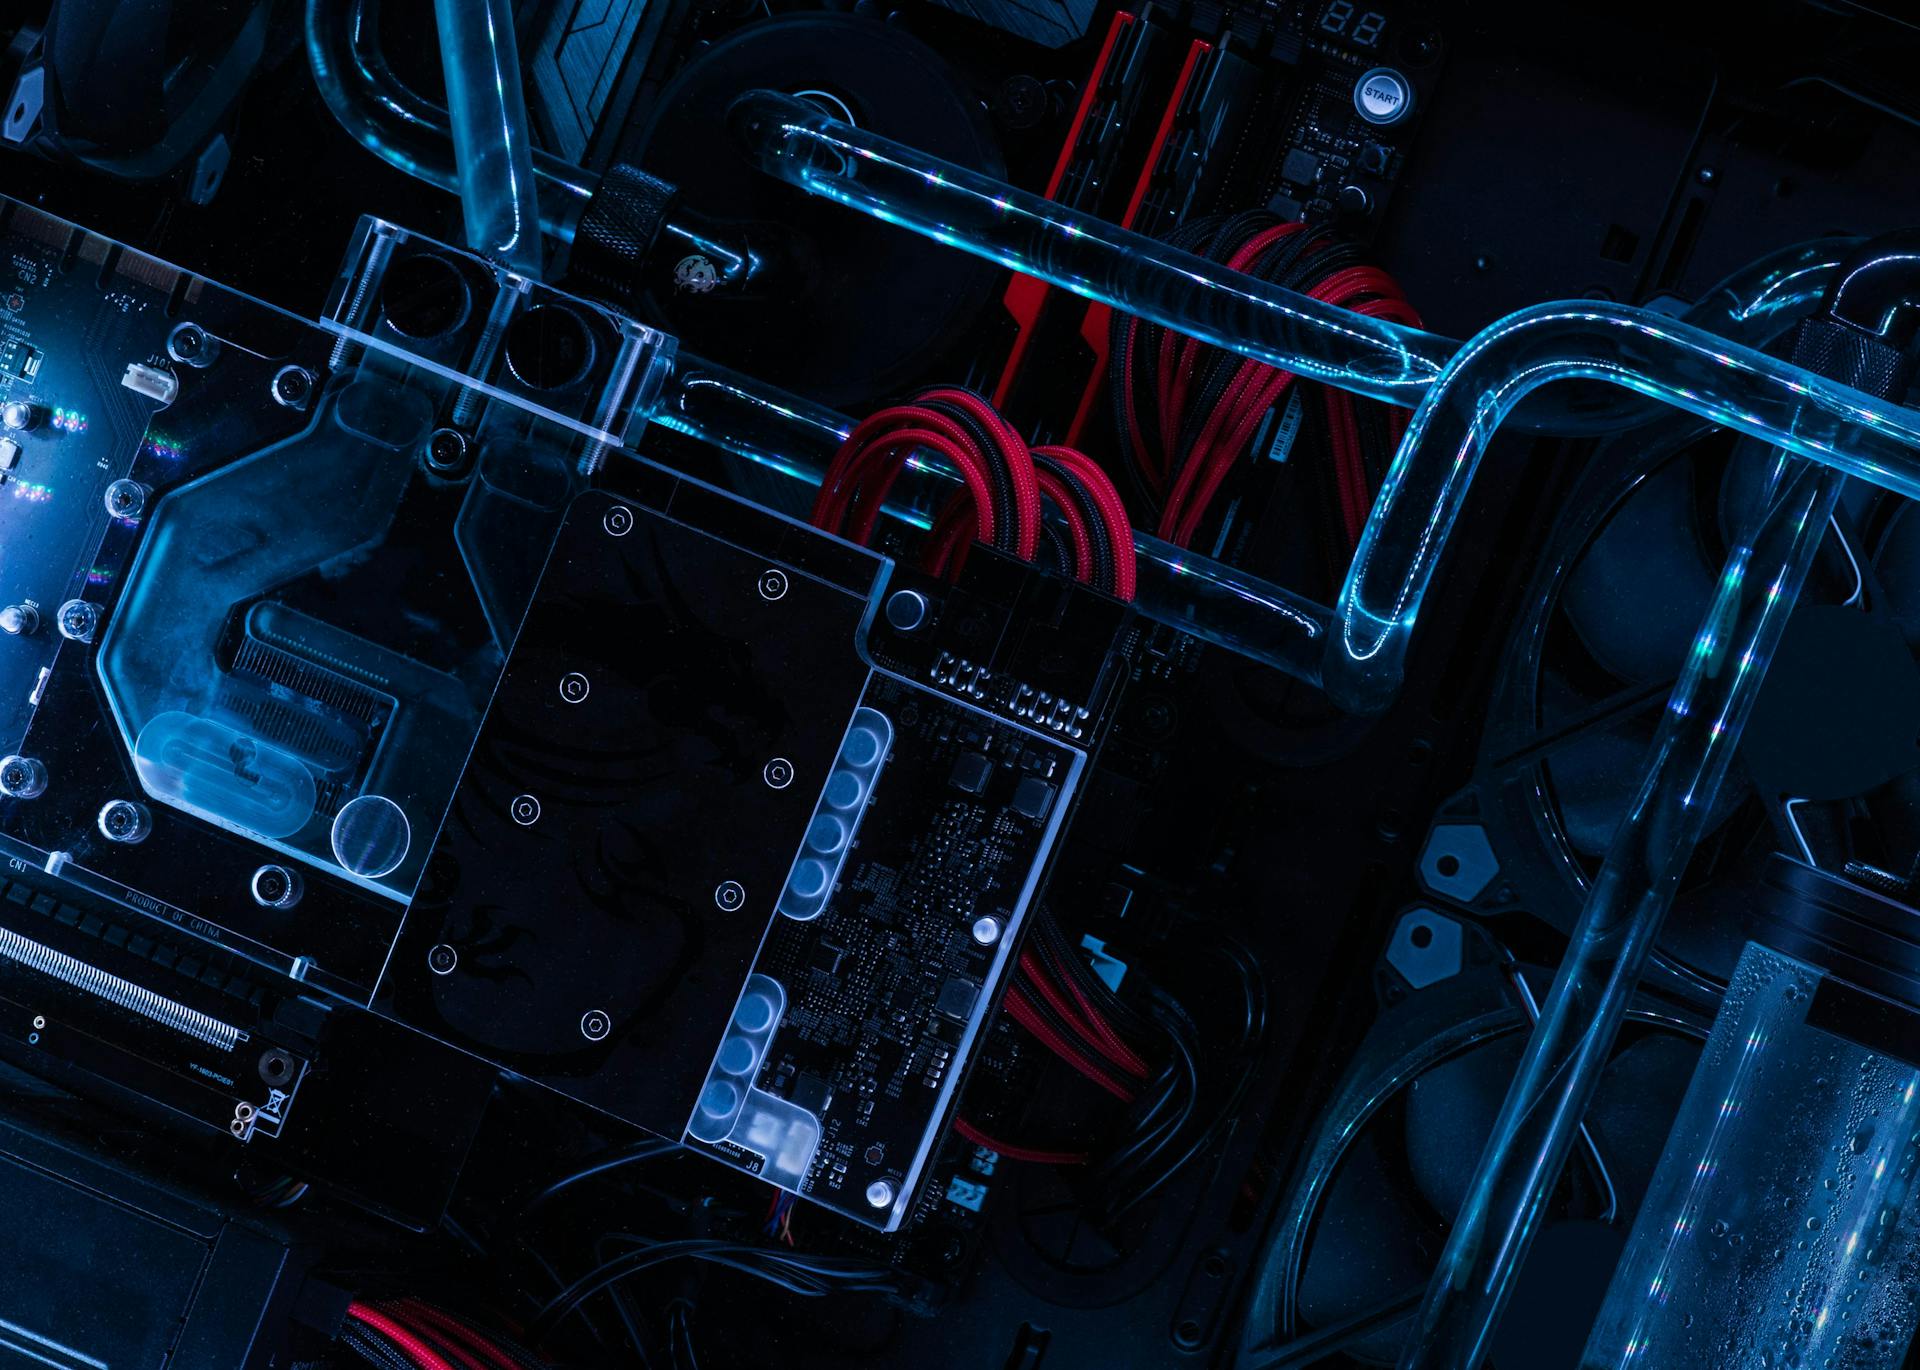 WaterCooling products